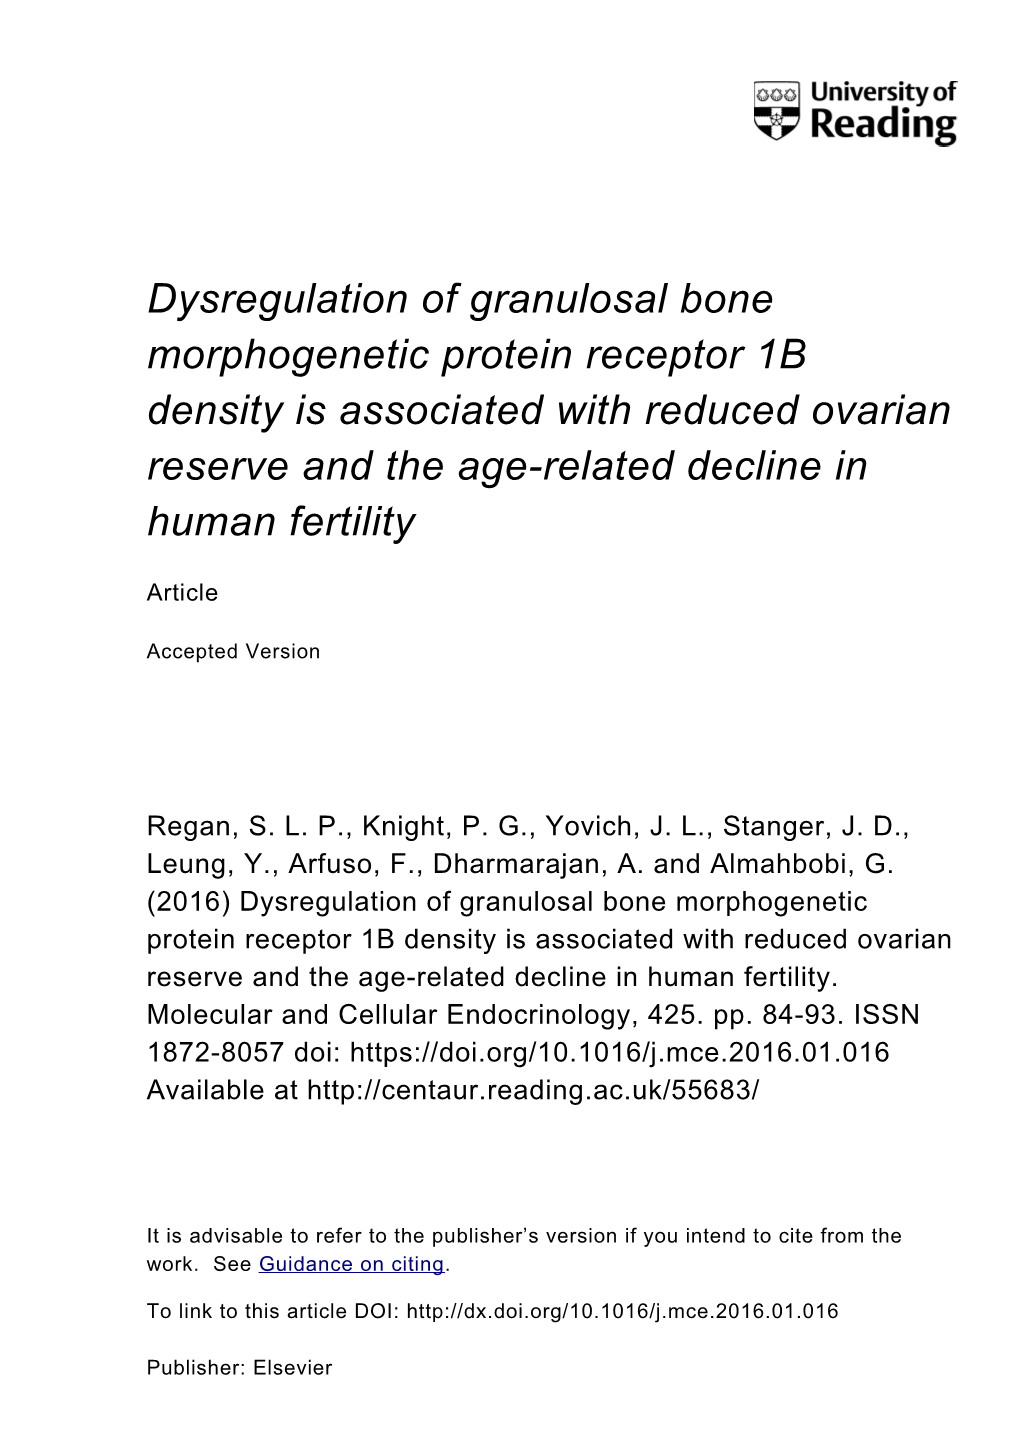 Dysregulation of Granulosal Bone Morphogenetic Protein Receptor 1B Density Is Associated with Reduced Ovarian Reserve and the Age-Related Decline in Human Fertility